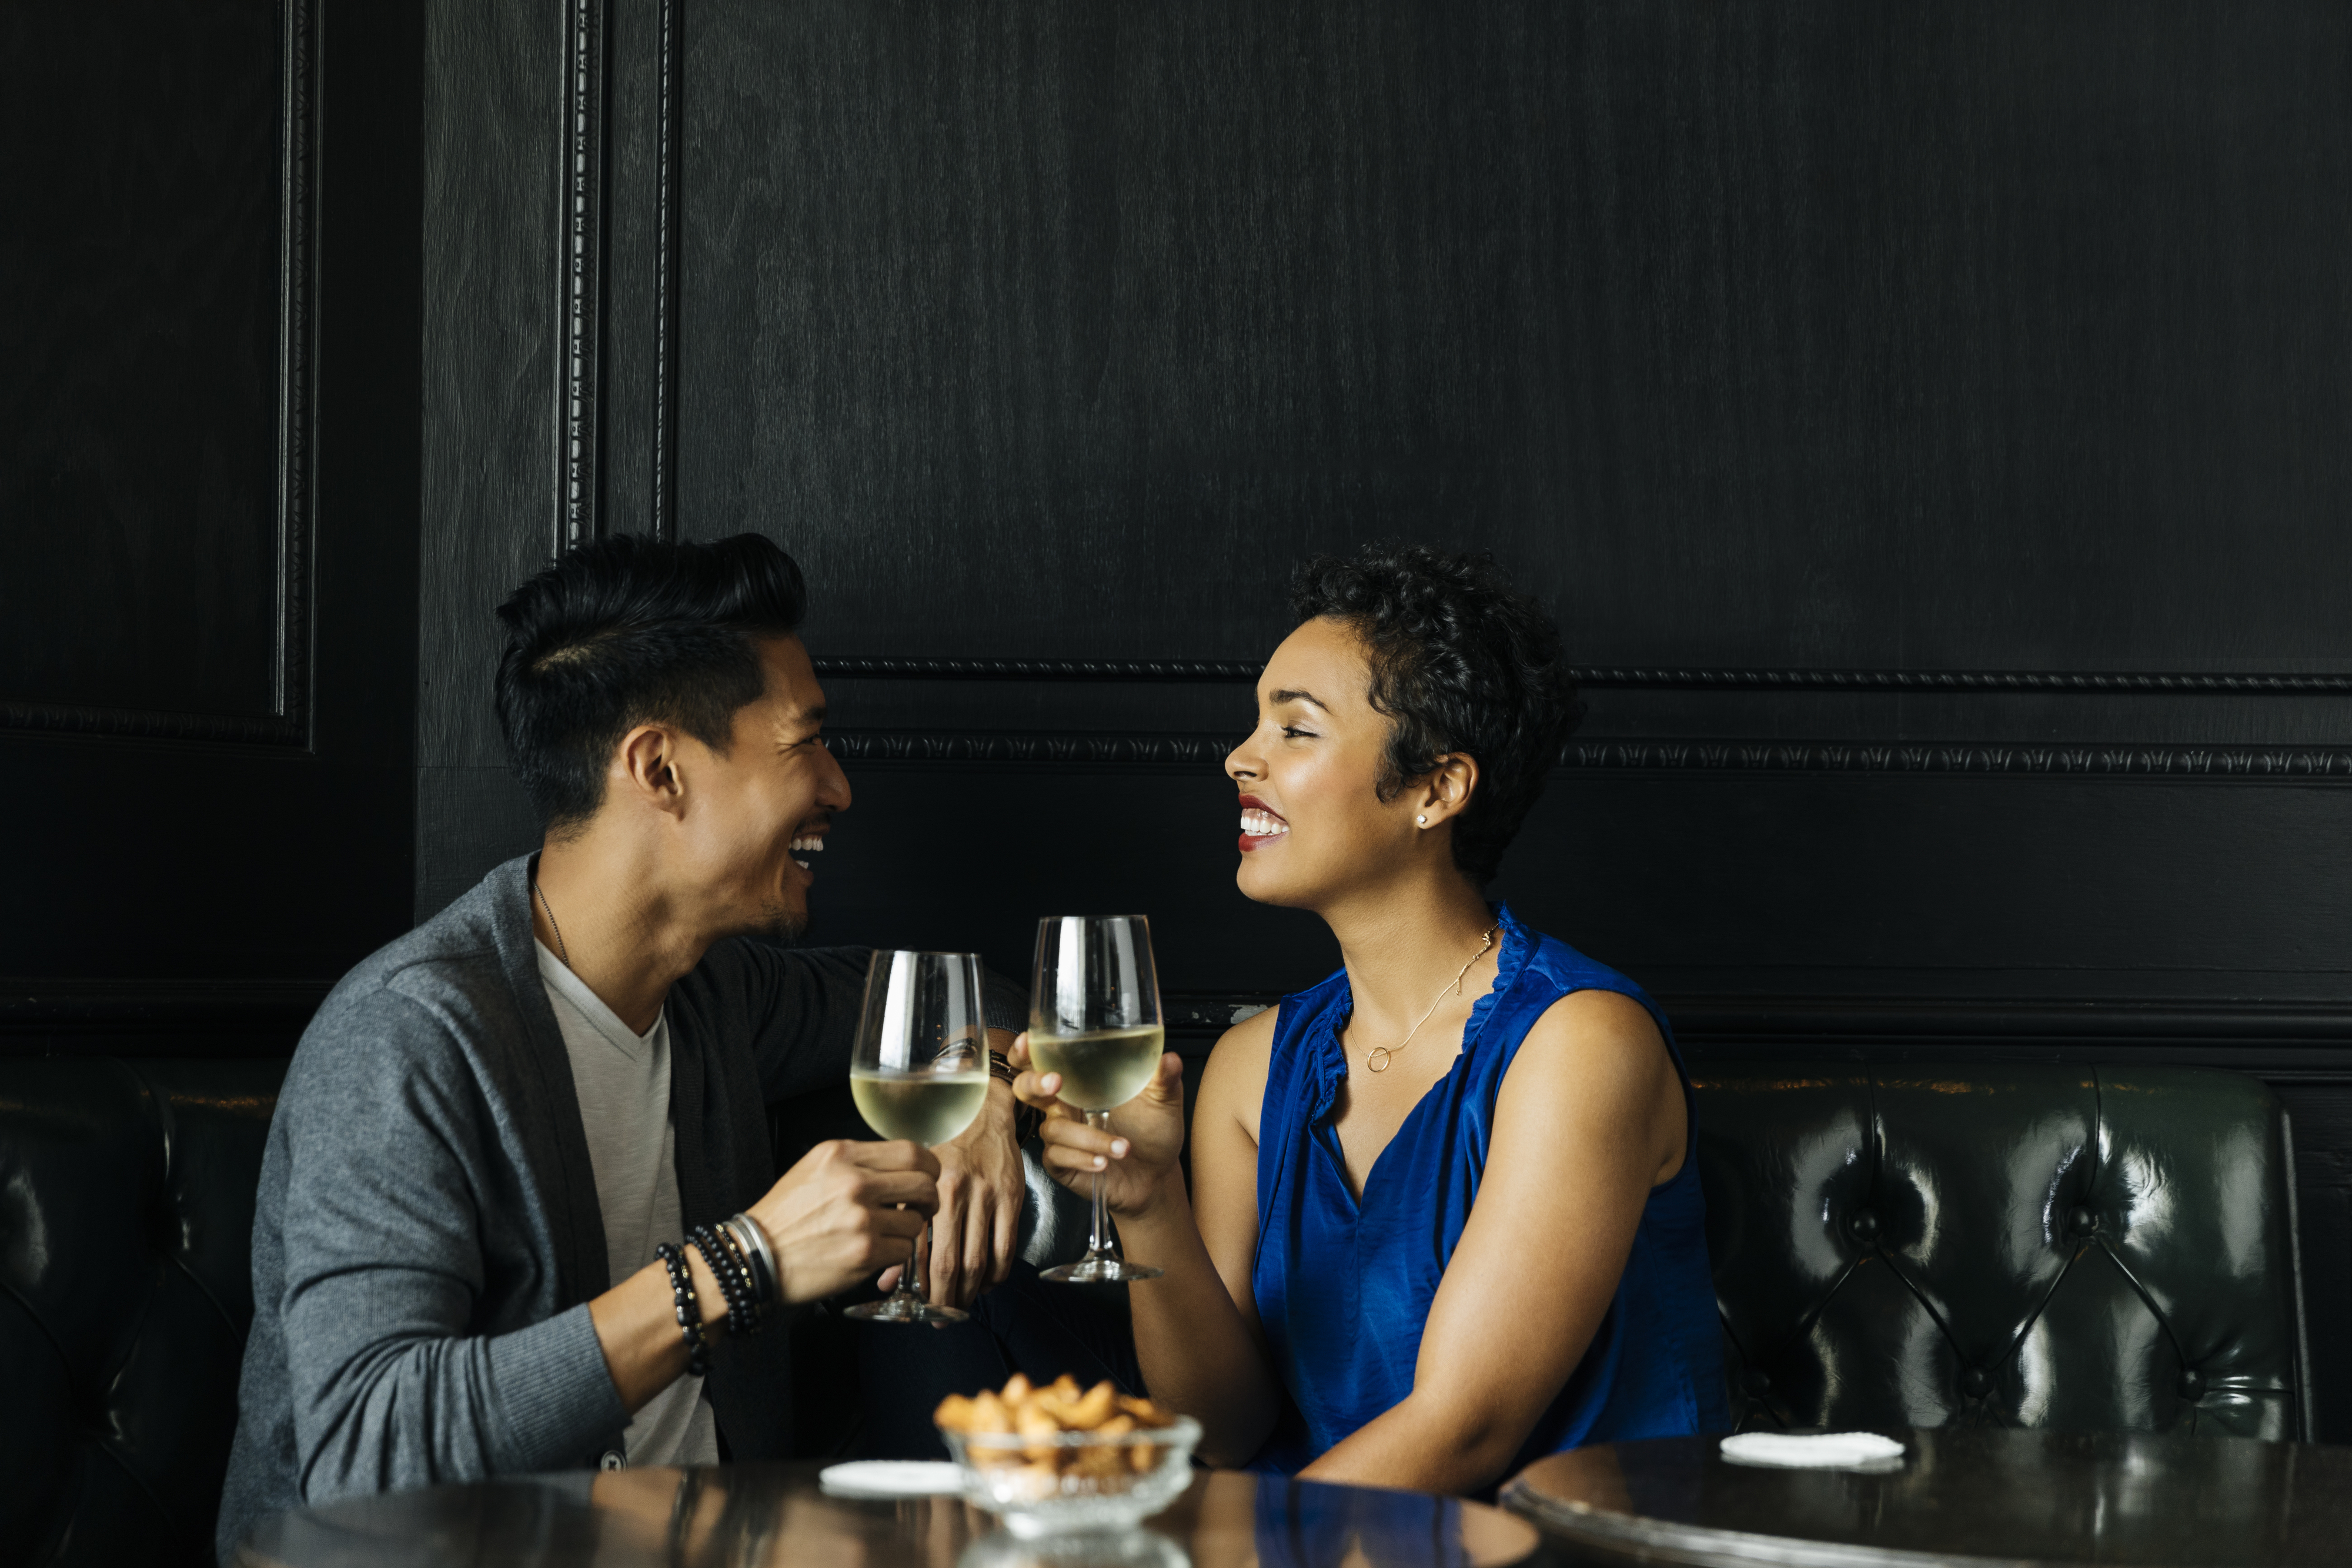 Two people smiling at each other, toasting with wine glasses at a table